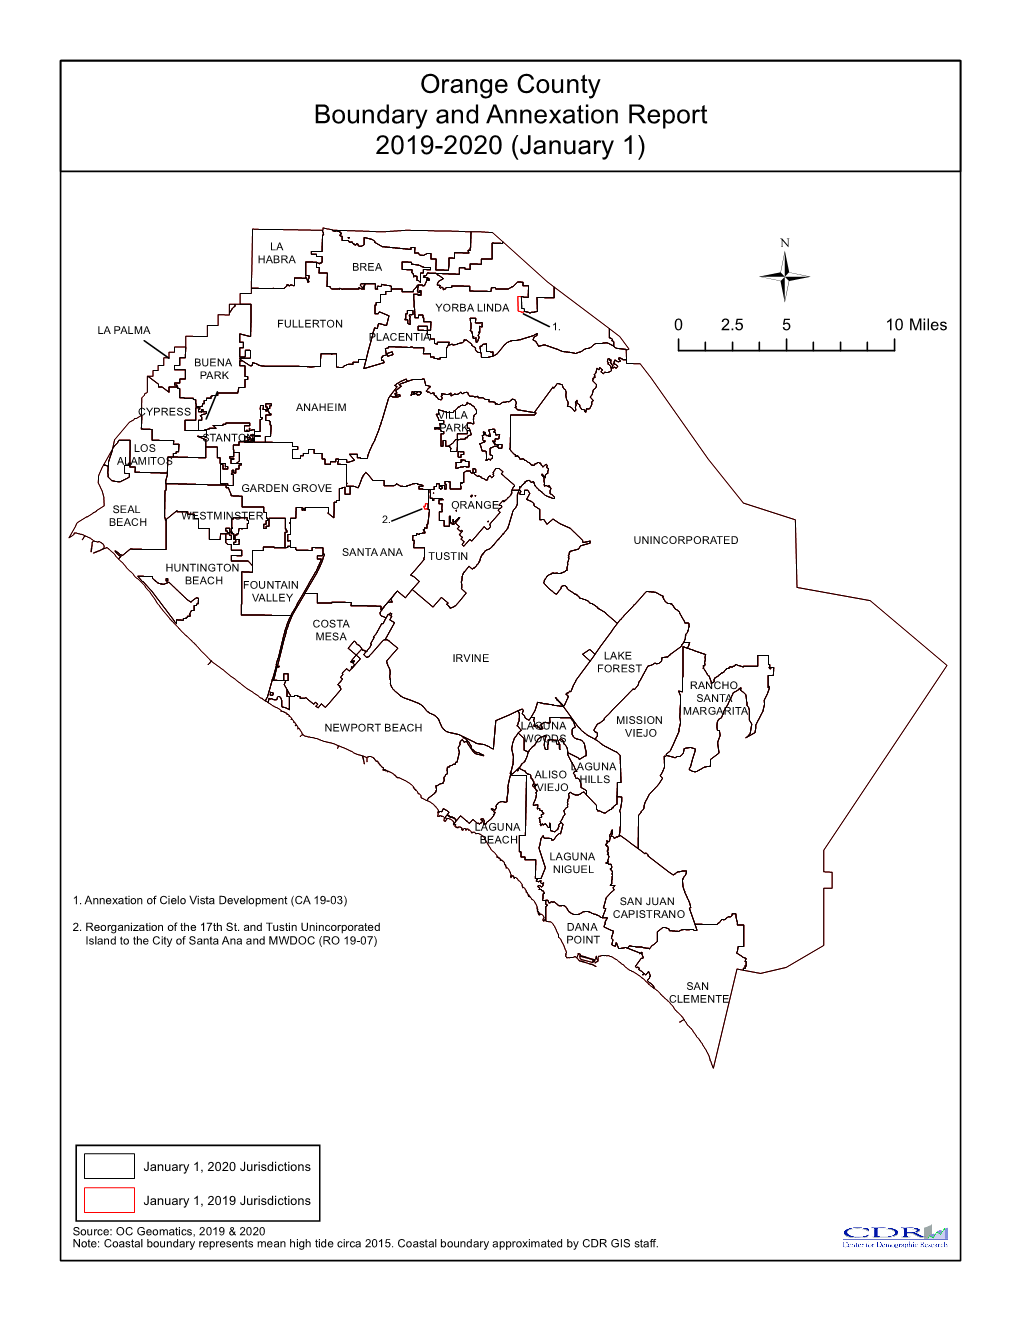 Orange County Boundary and Annexation Report 2019-2020 (January 1)